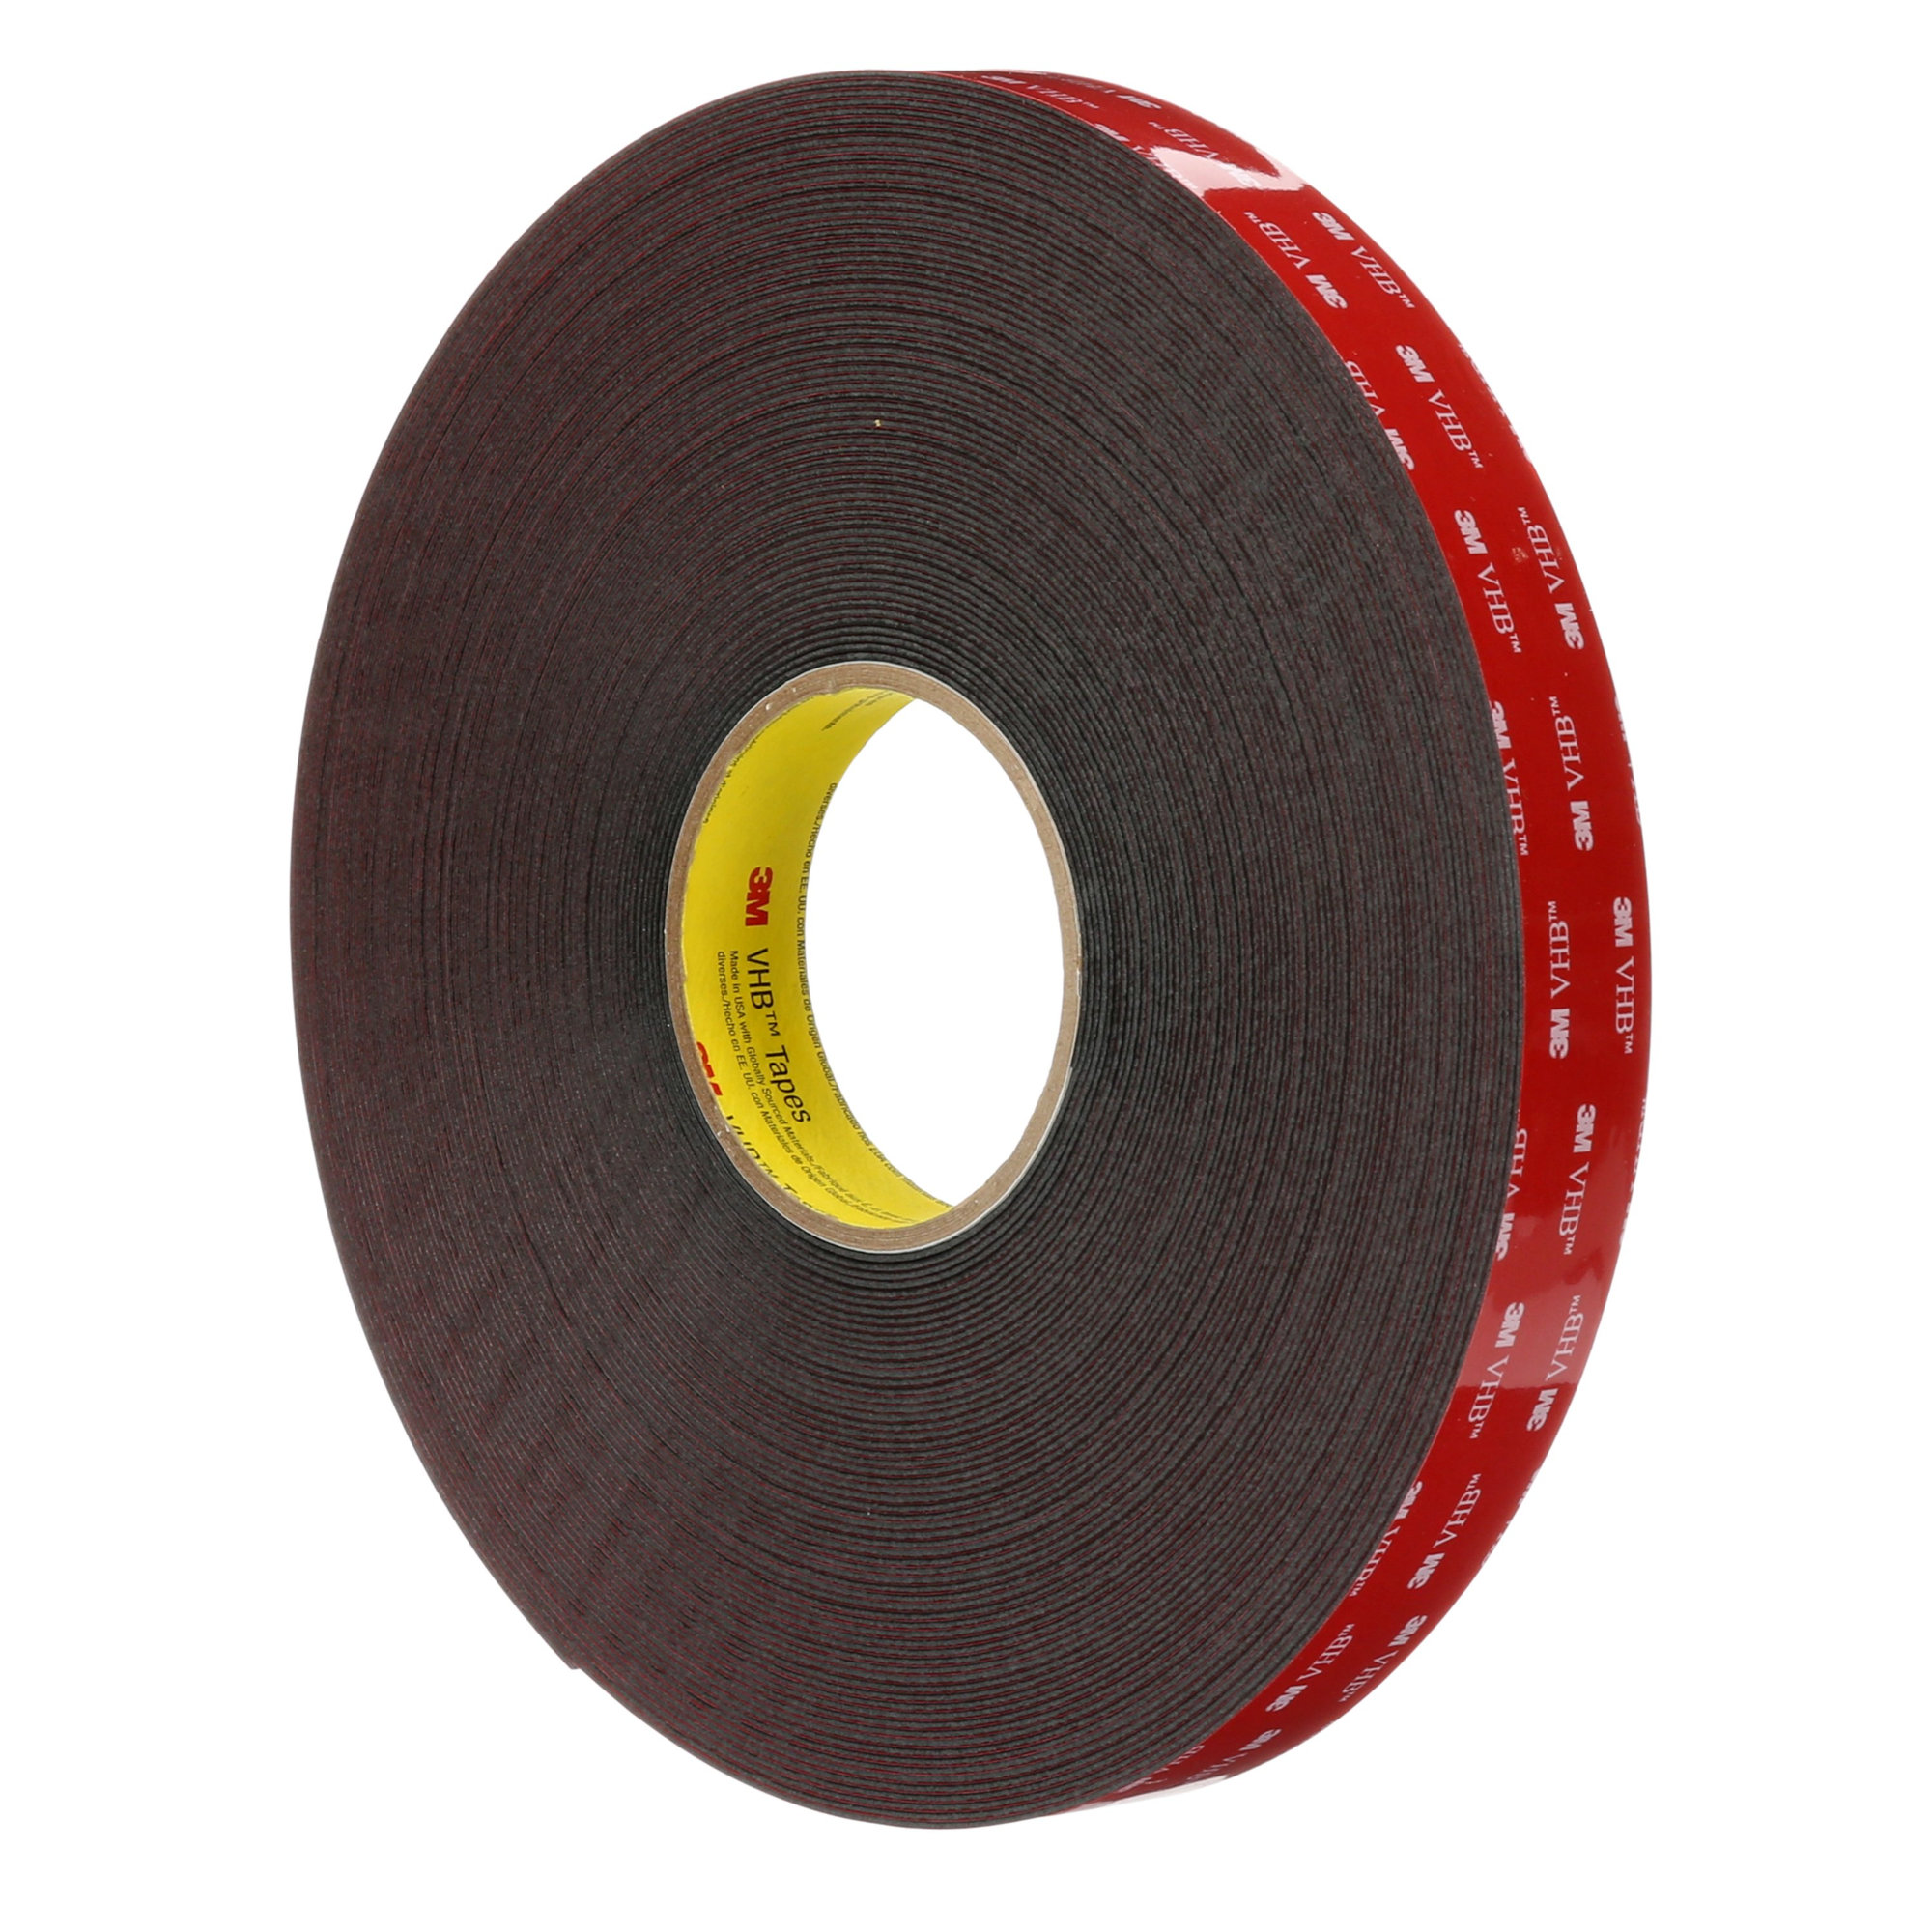 3M VHB Tape: The Simple Secret to Achieve 10X Better Results